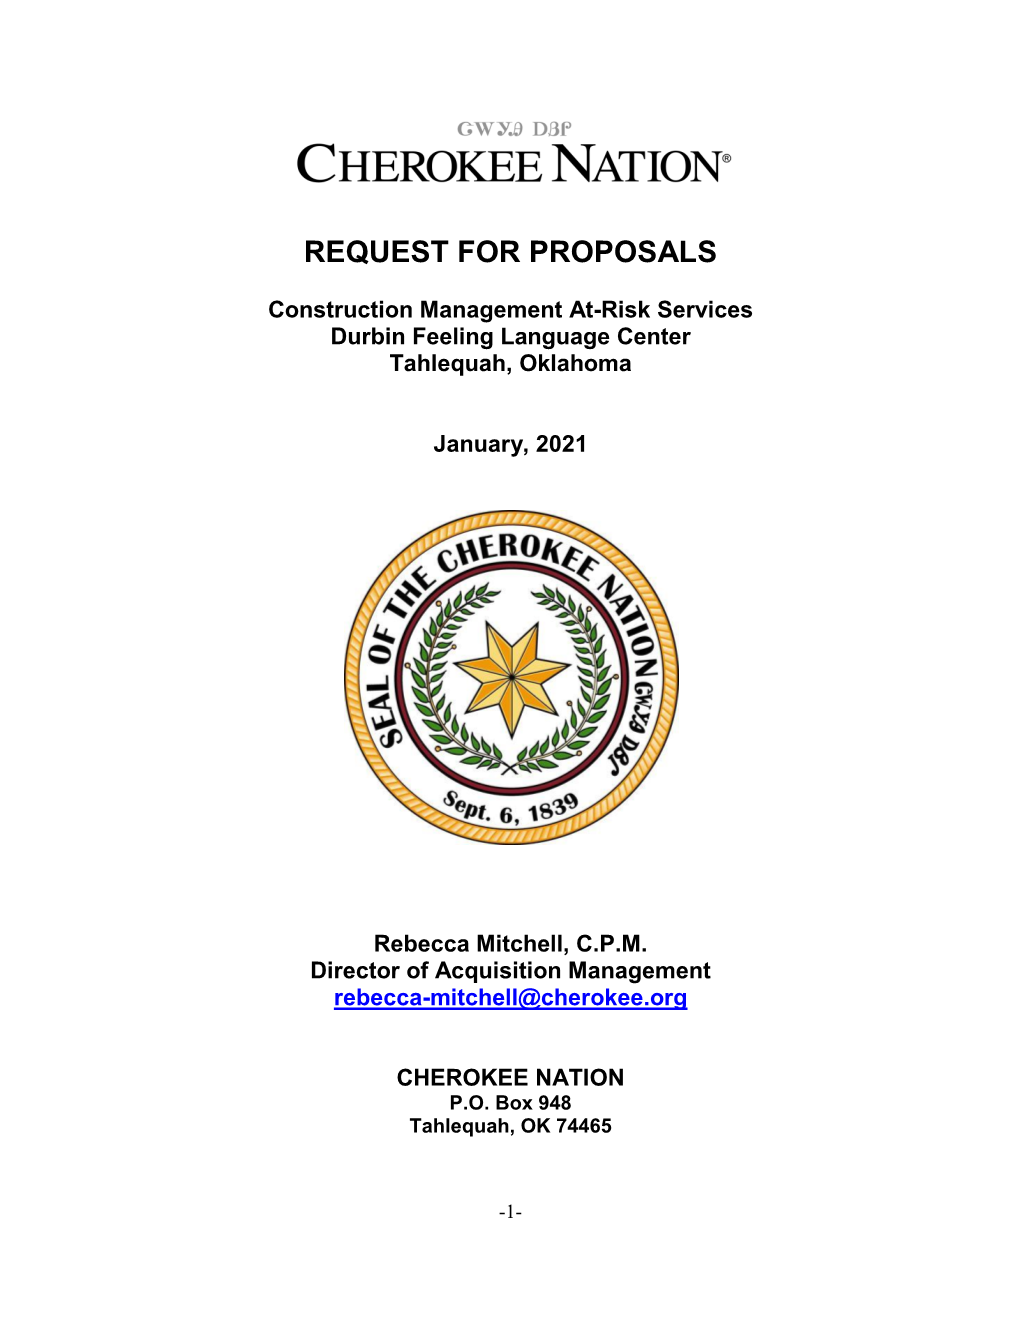 The Cherokee Nation Plans to Select As Many As Three